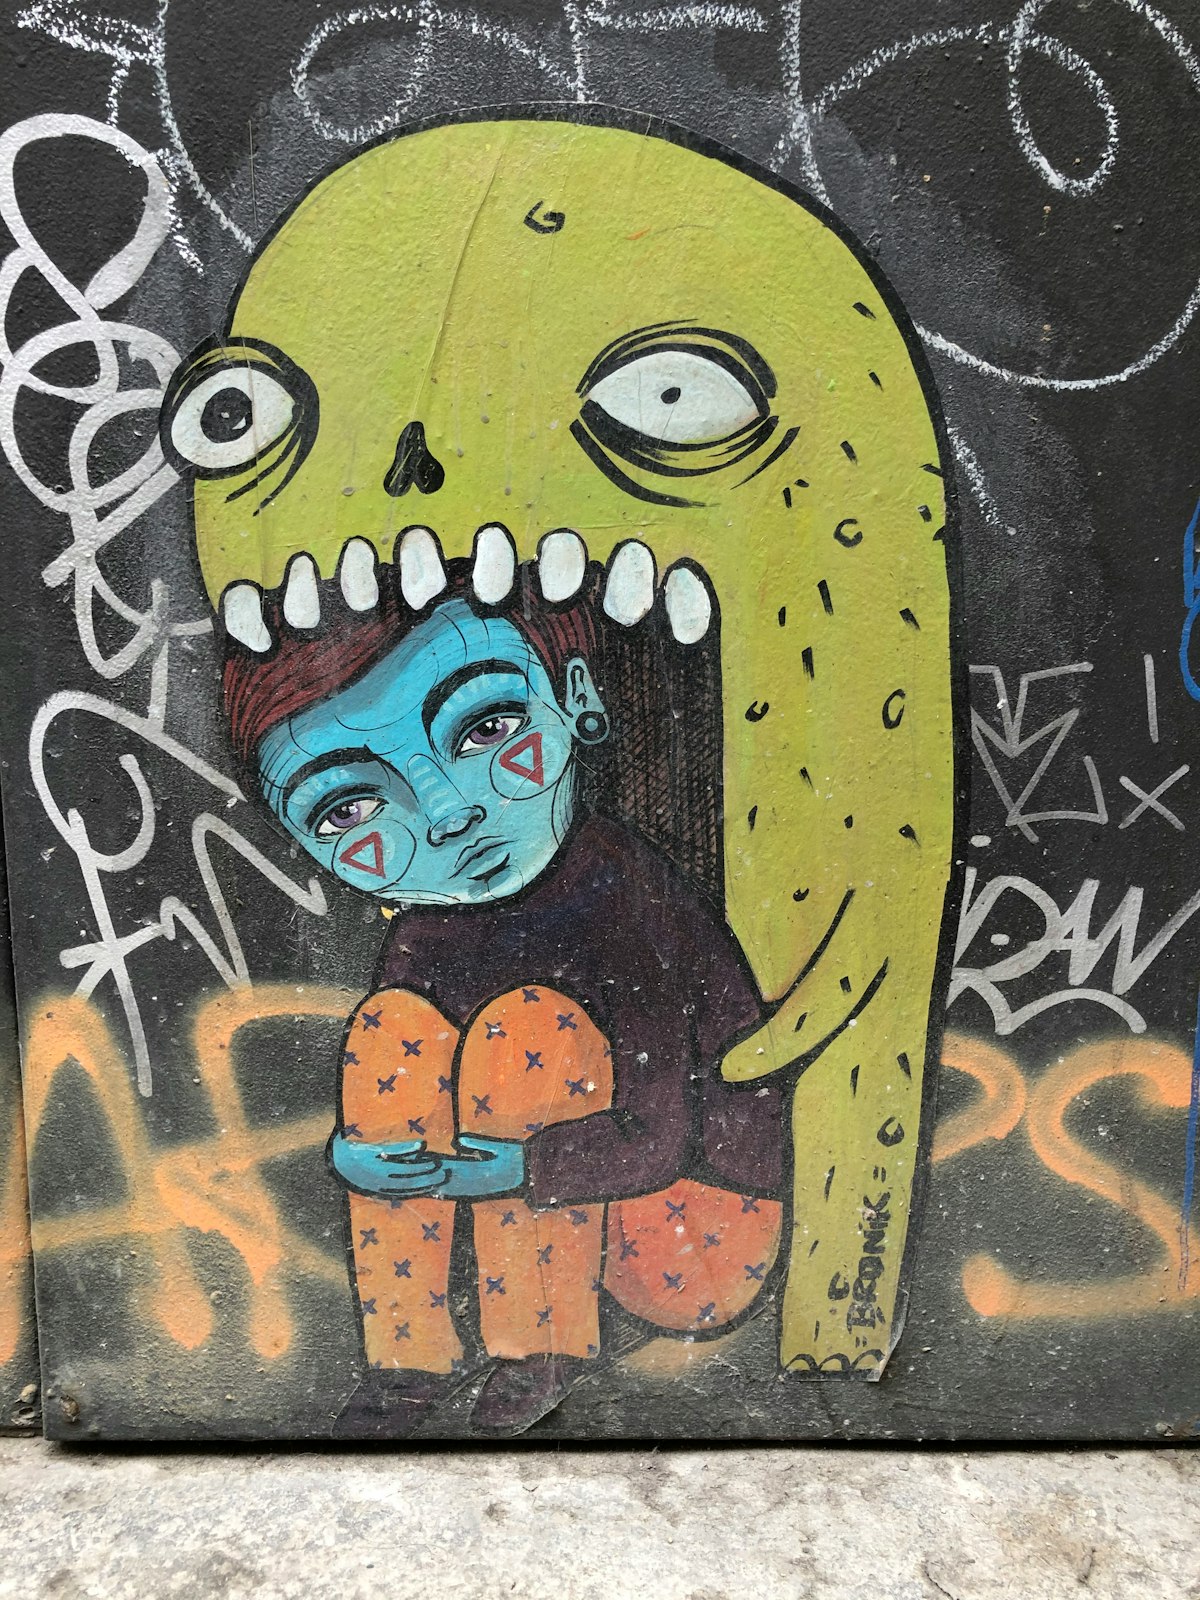 Graffit style drawing.  There is a like green monster with one dilated pupil and one regular pupil.  It has a huge mouth and fearsome teeth.  In his mouth is a blue skinned boy wearing a brown sweater and orange pants with little x's. He has two red inverted triangles on his cheeks and seems sad.